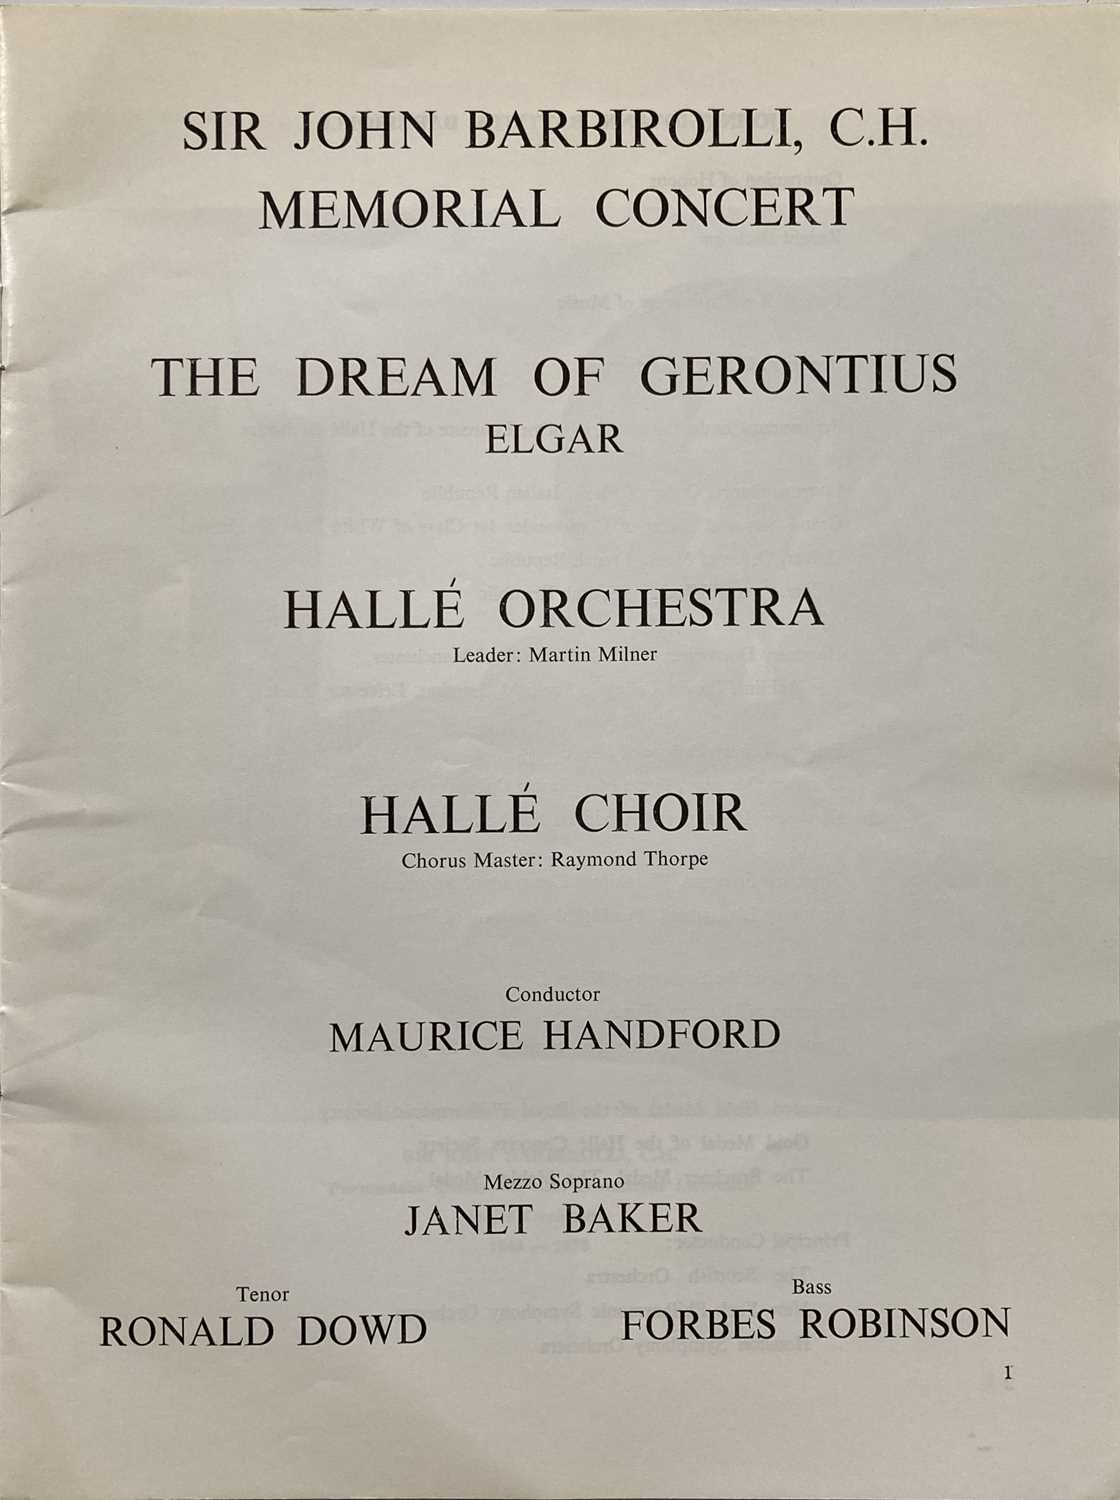 CLASSICAL MUSIC - INTERNATIONAL ORCHESTRAS - CONCERT PROGRAMMES / POSTERS - Image 4 of 15